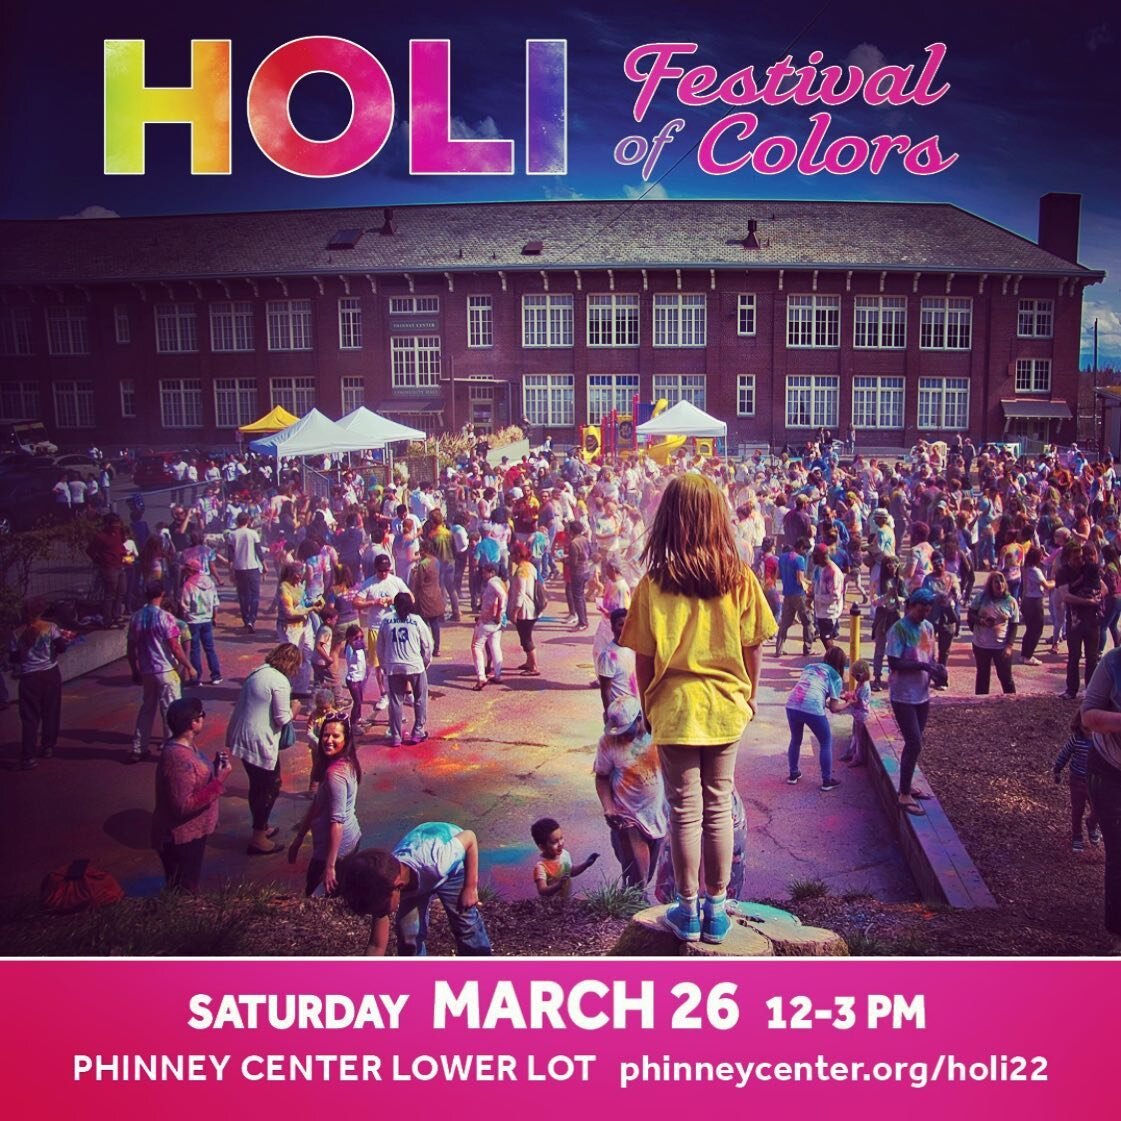 Super excited to be dj&rsquo;ing Holi this year! I have attended this event 3 times now and it&rsquo;s so much fun. Throwing color. Eating good food. Dancing to the vibes. 

Link to e-vite in bio 
&mdash;-

Holi celebrates the arrival of spring, the 